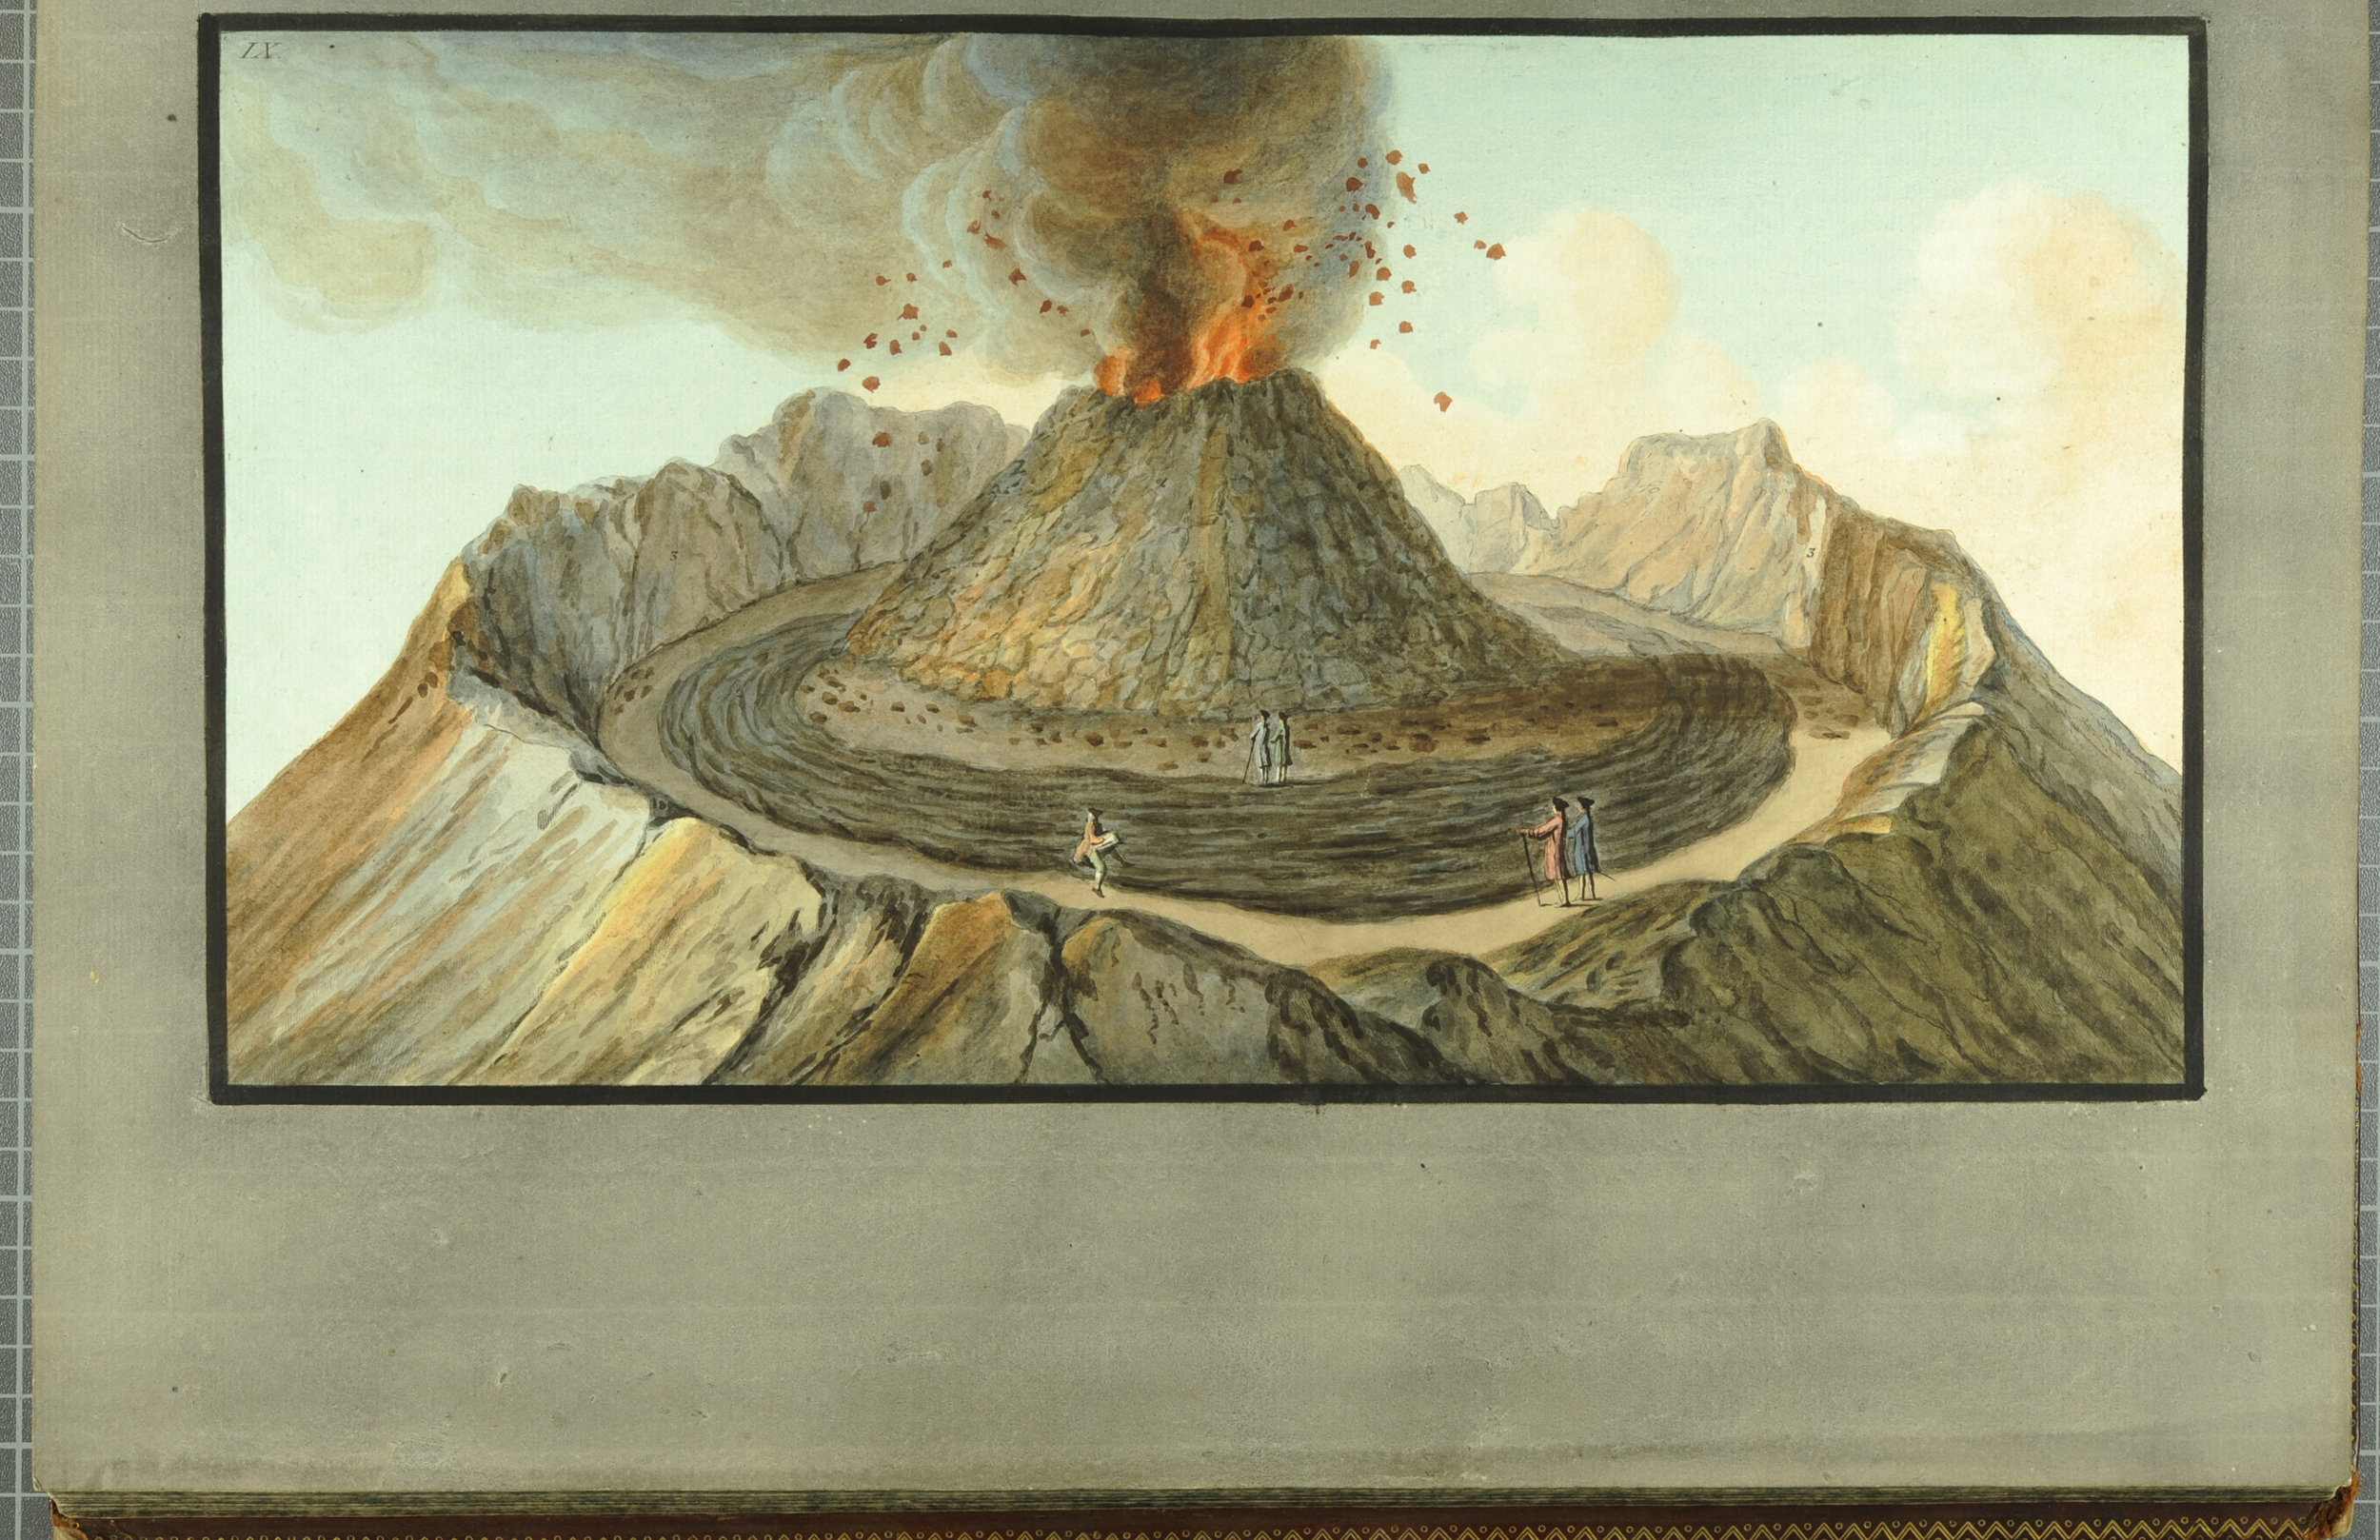 "Interior view of the crater of Mount Vesuvius, as it was before the great eruption of 1767." From William Hamilton’s Campi Phlegraei (St Andrews rff QE523.V5H3 (SR))